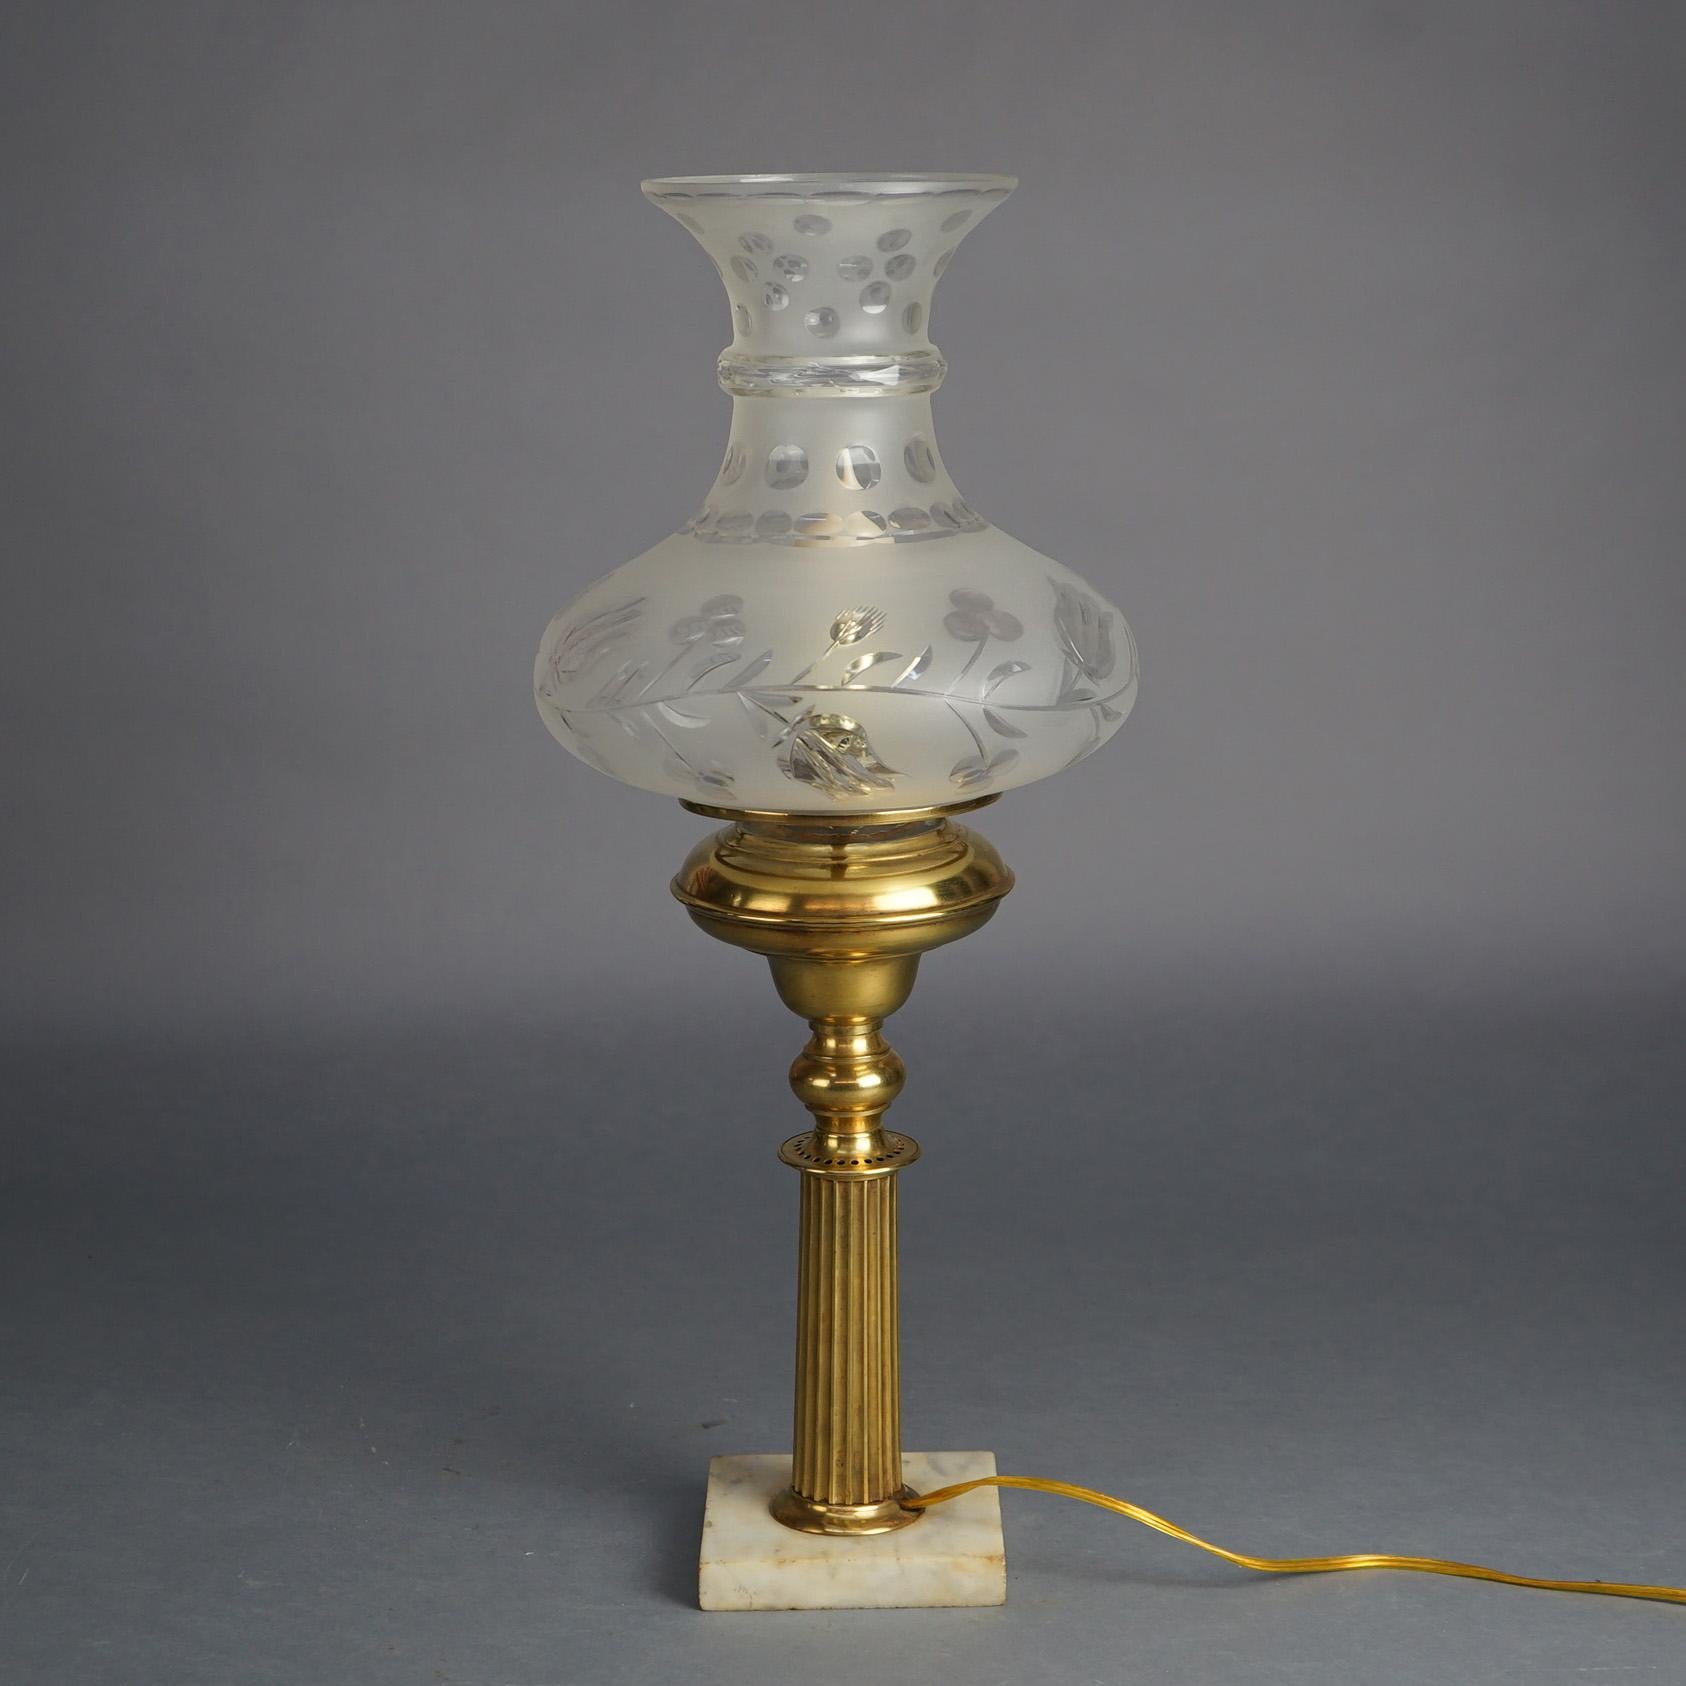 American Antique Brass Solar Lamp with Tam-O-Shanter Cut Glass Shade & Marble Base C1840 For Sale